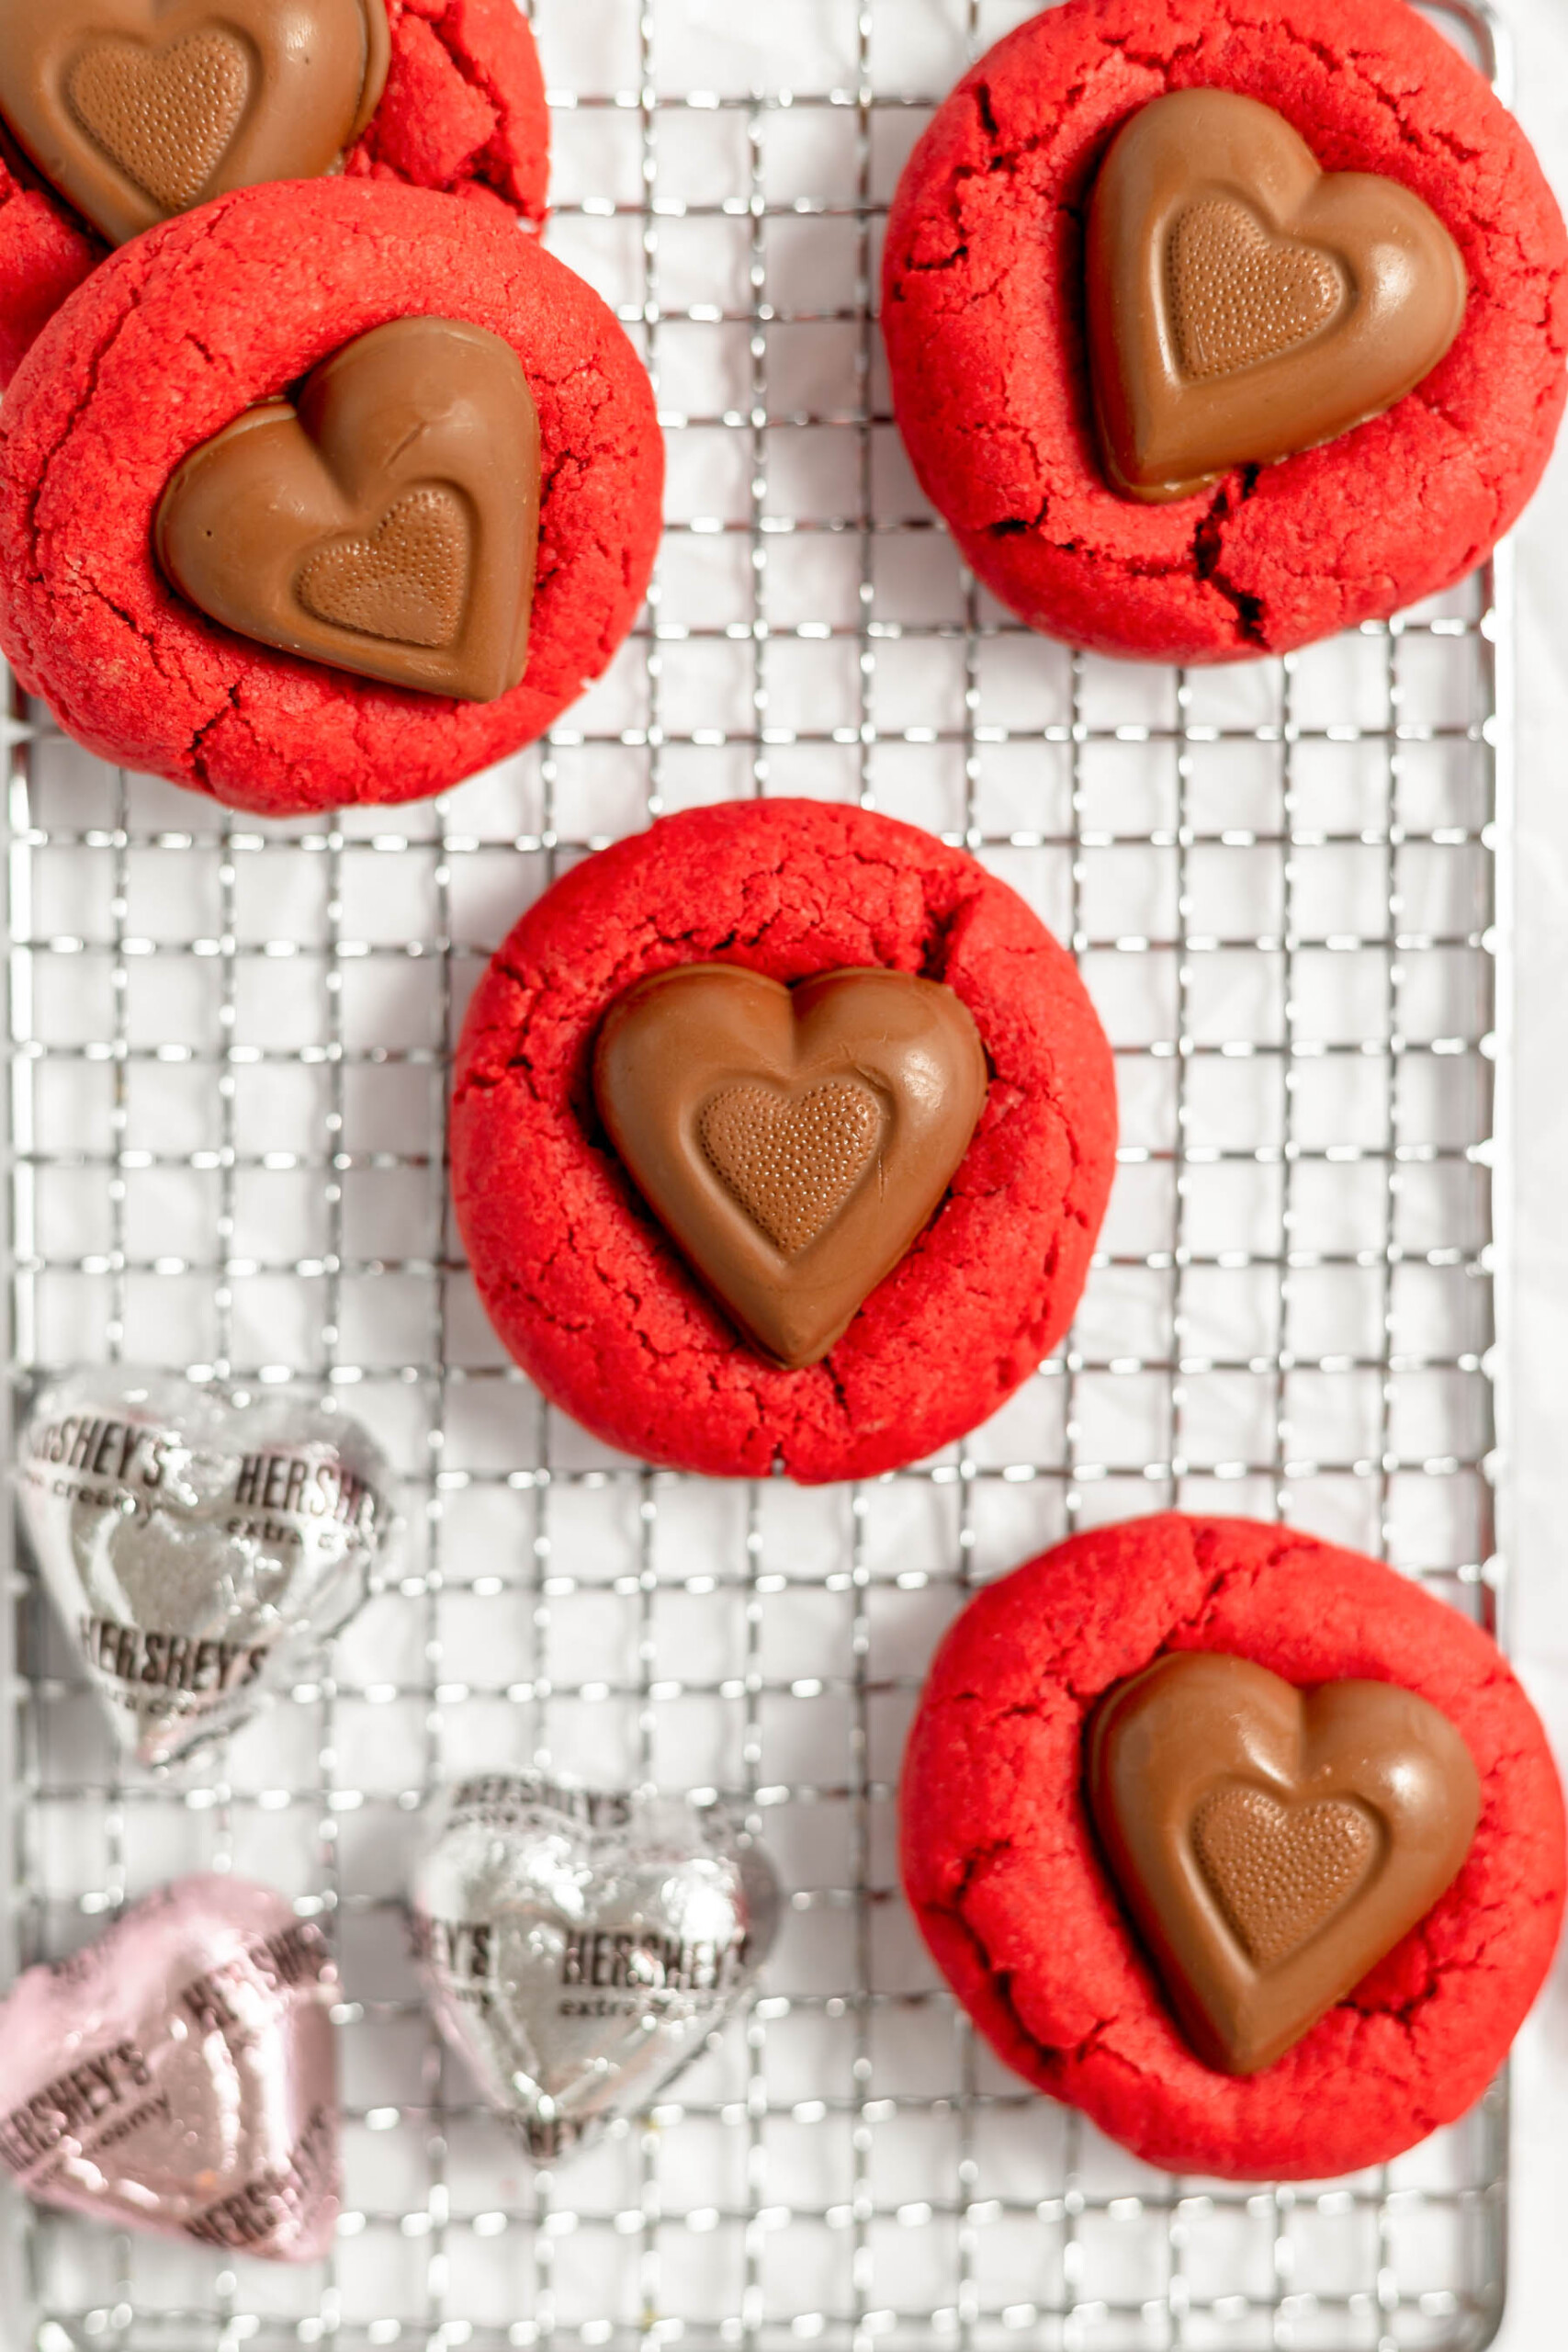 Red velvet kiss cookies on a wire cooling rack next to unwrapped Hershey's chocolate hearts.